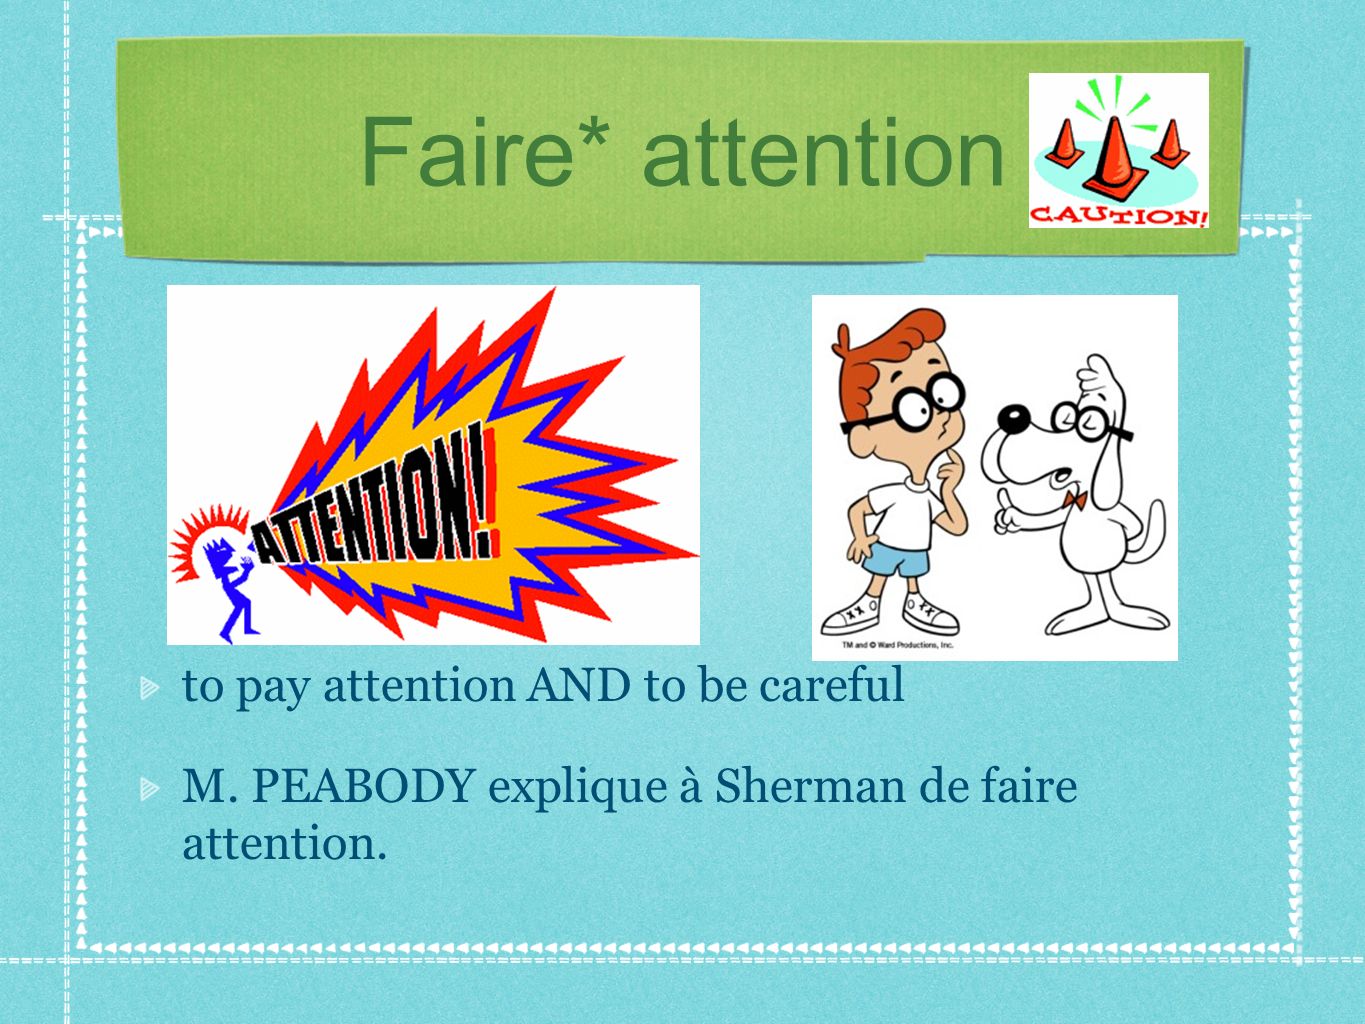 Faire* attention to pay attention AND to be careful M.